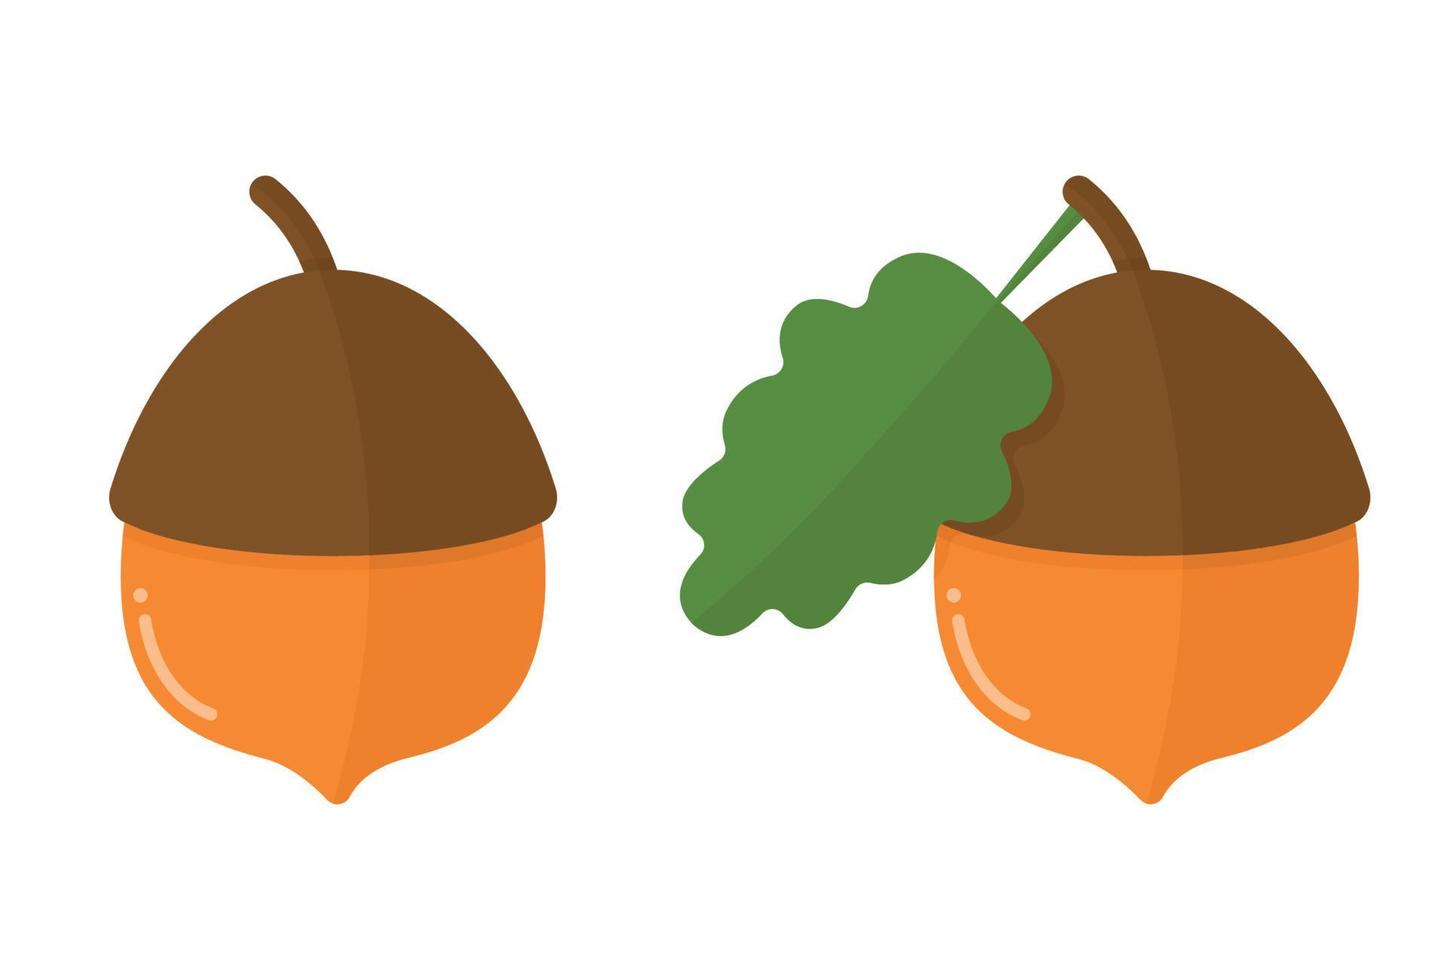 Acorn flat icon leaf nut and food vector graphics colorful solid drawing on a white background. A set of two images of an acorn. Acorn with a leaf. Brown Acorn